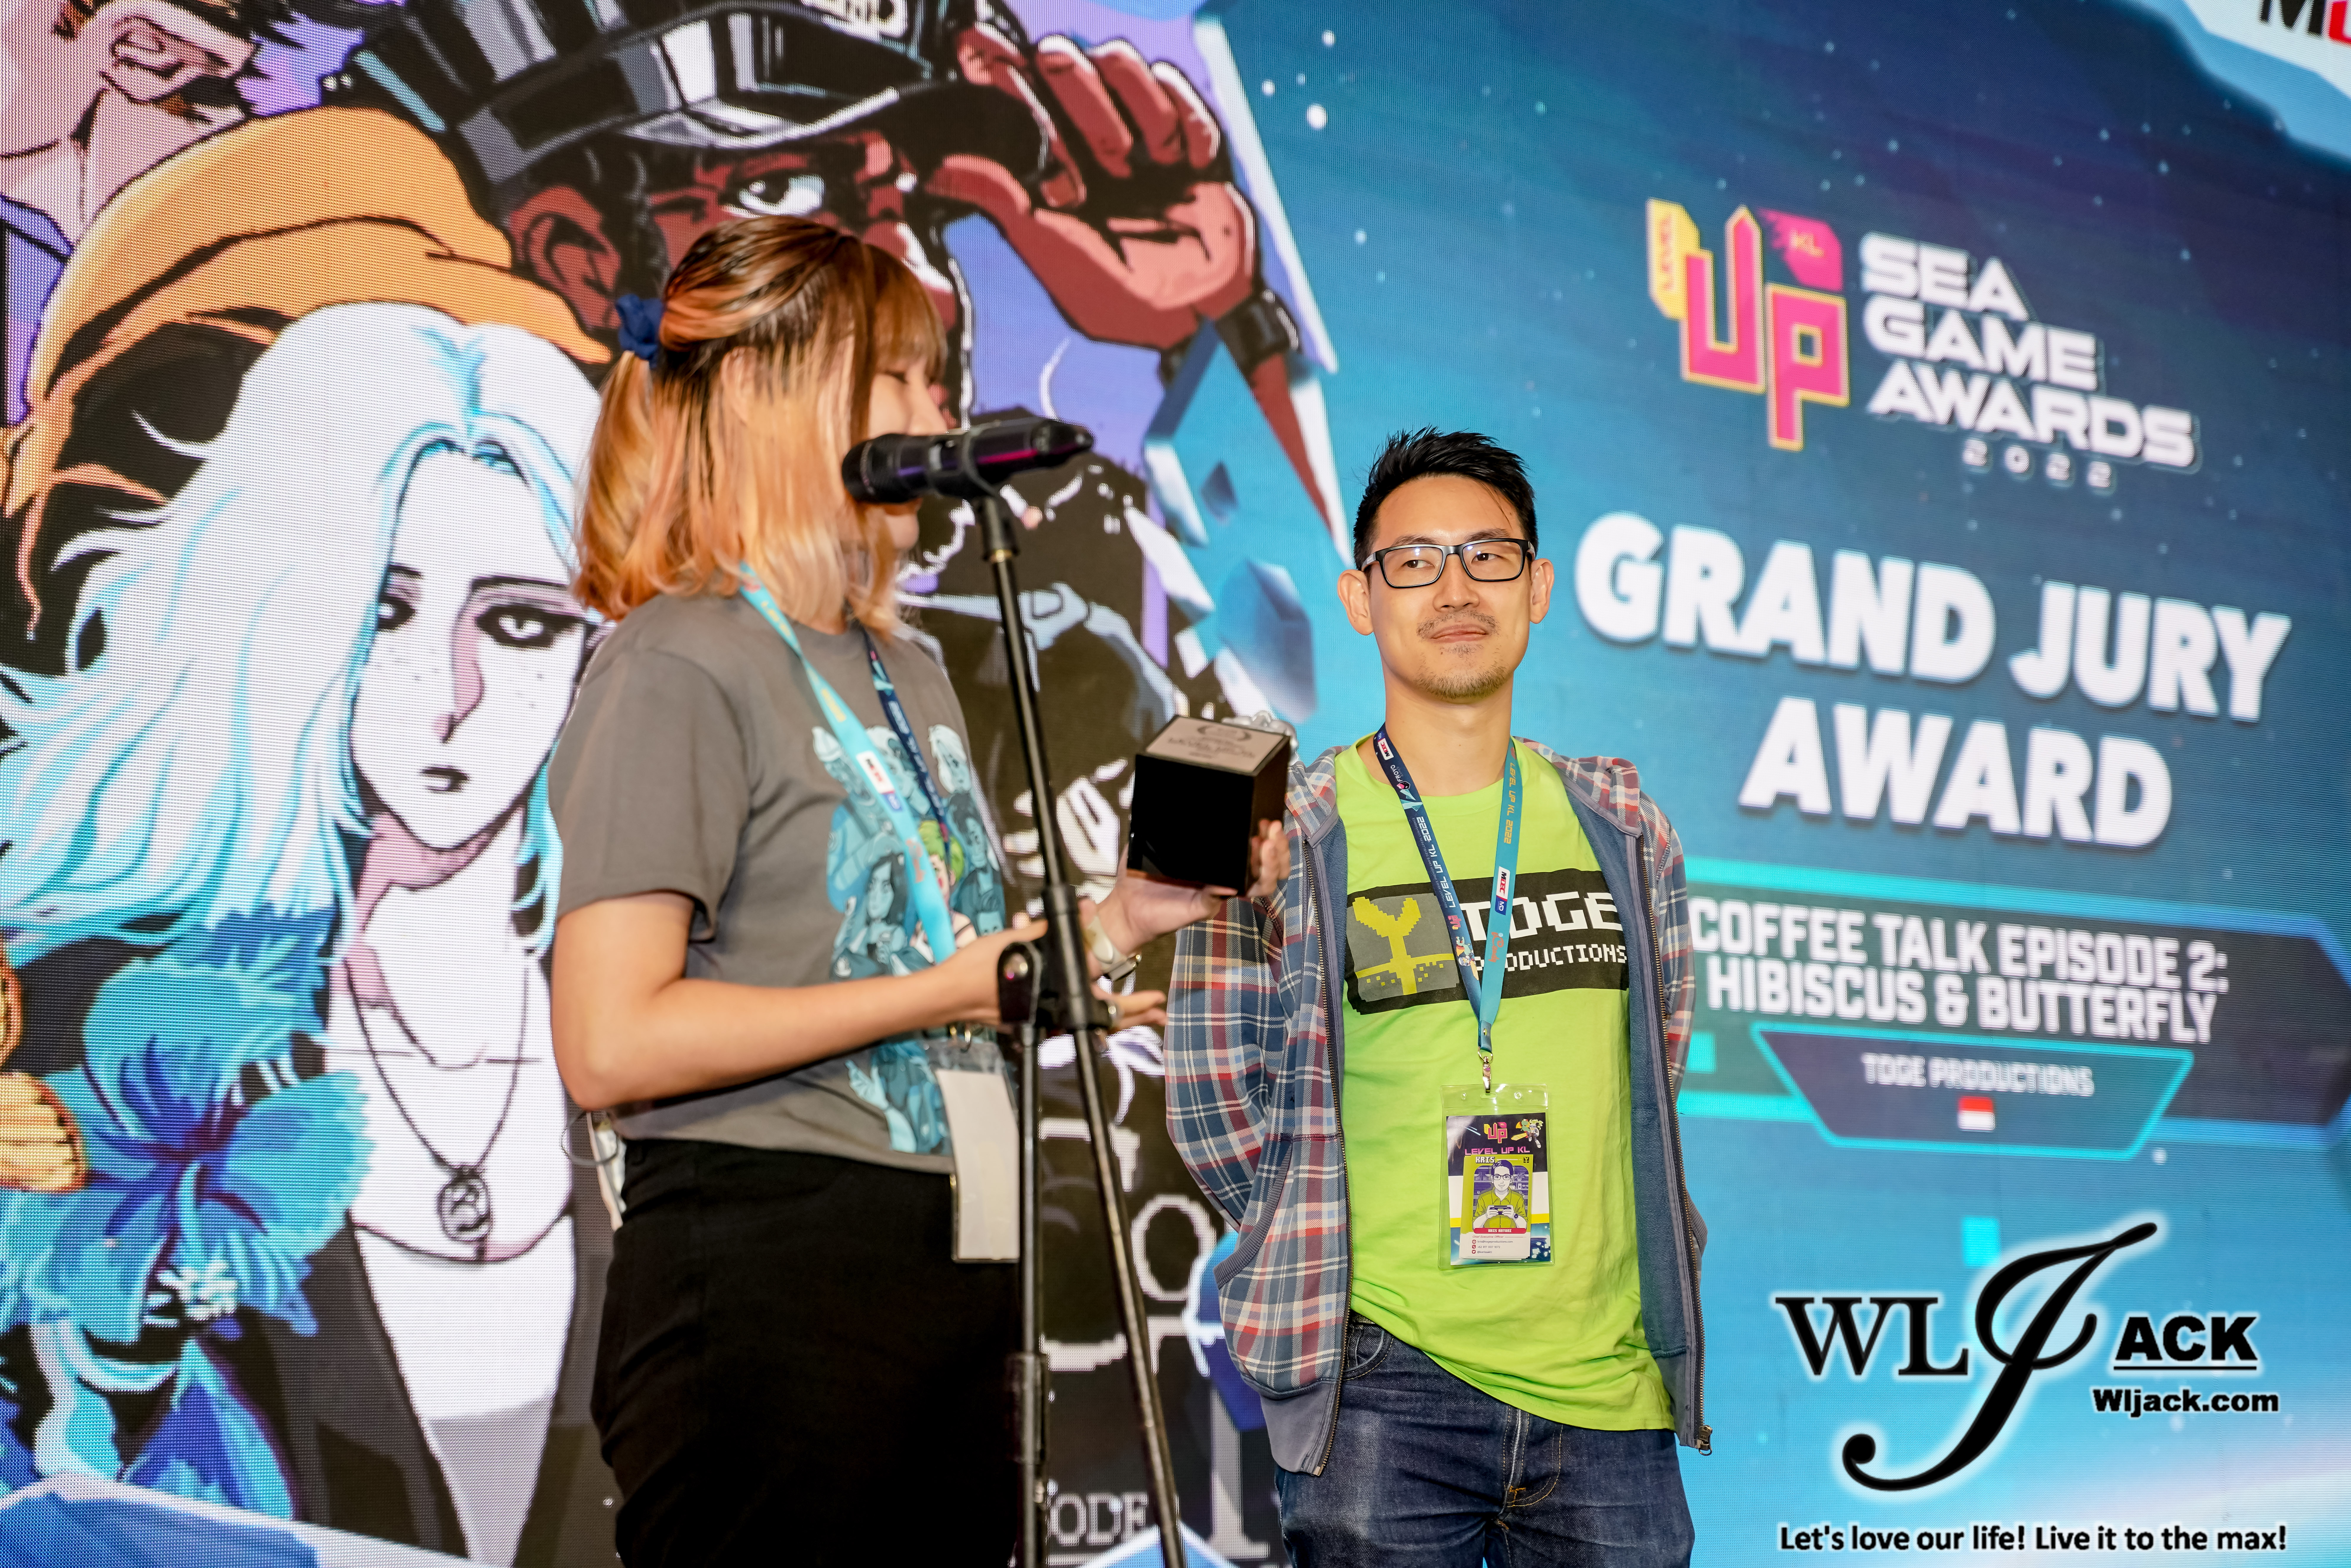 Games to look out for based on Level Up KL SEA Game Awards 2020